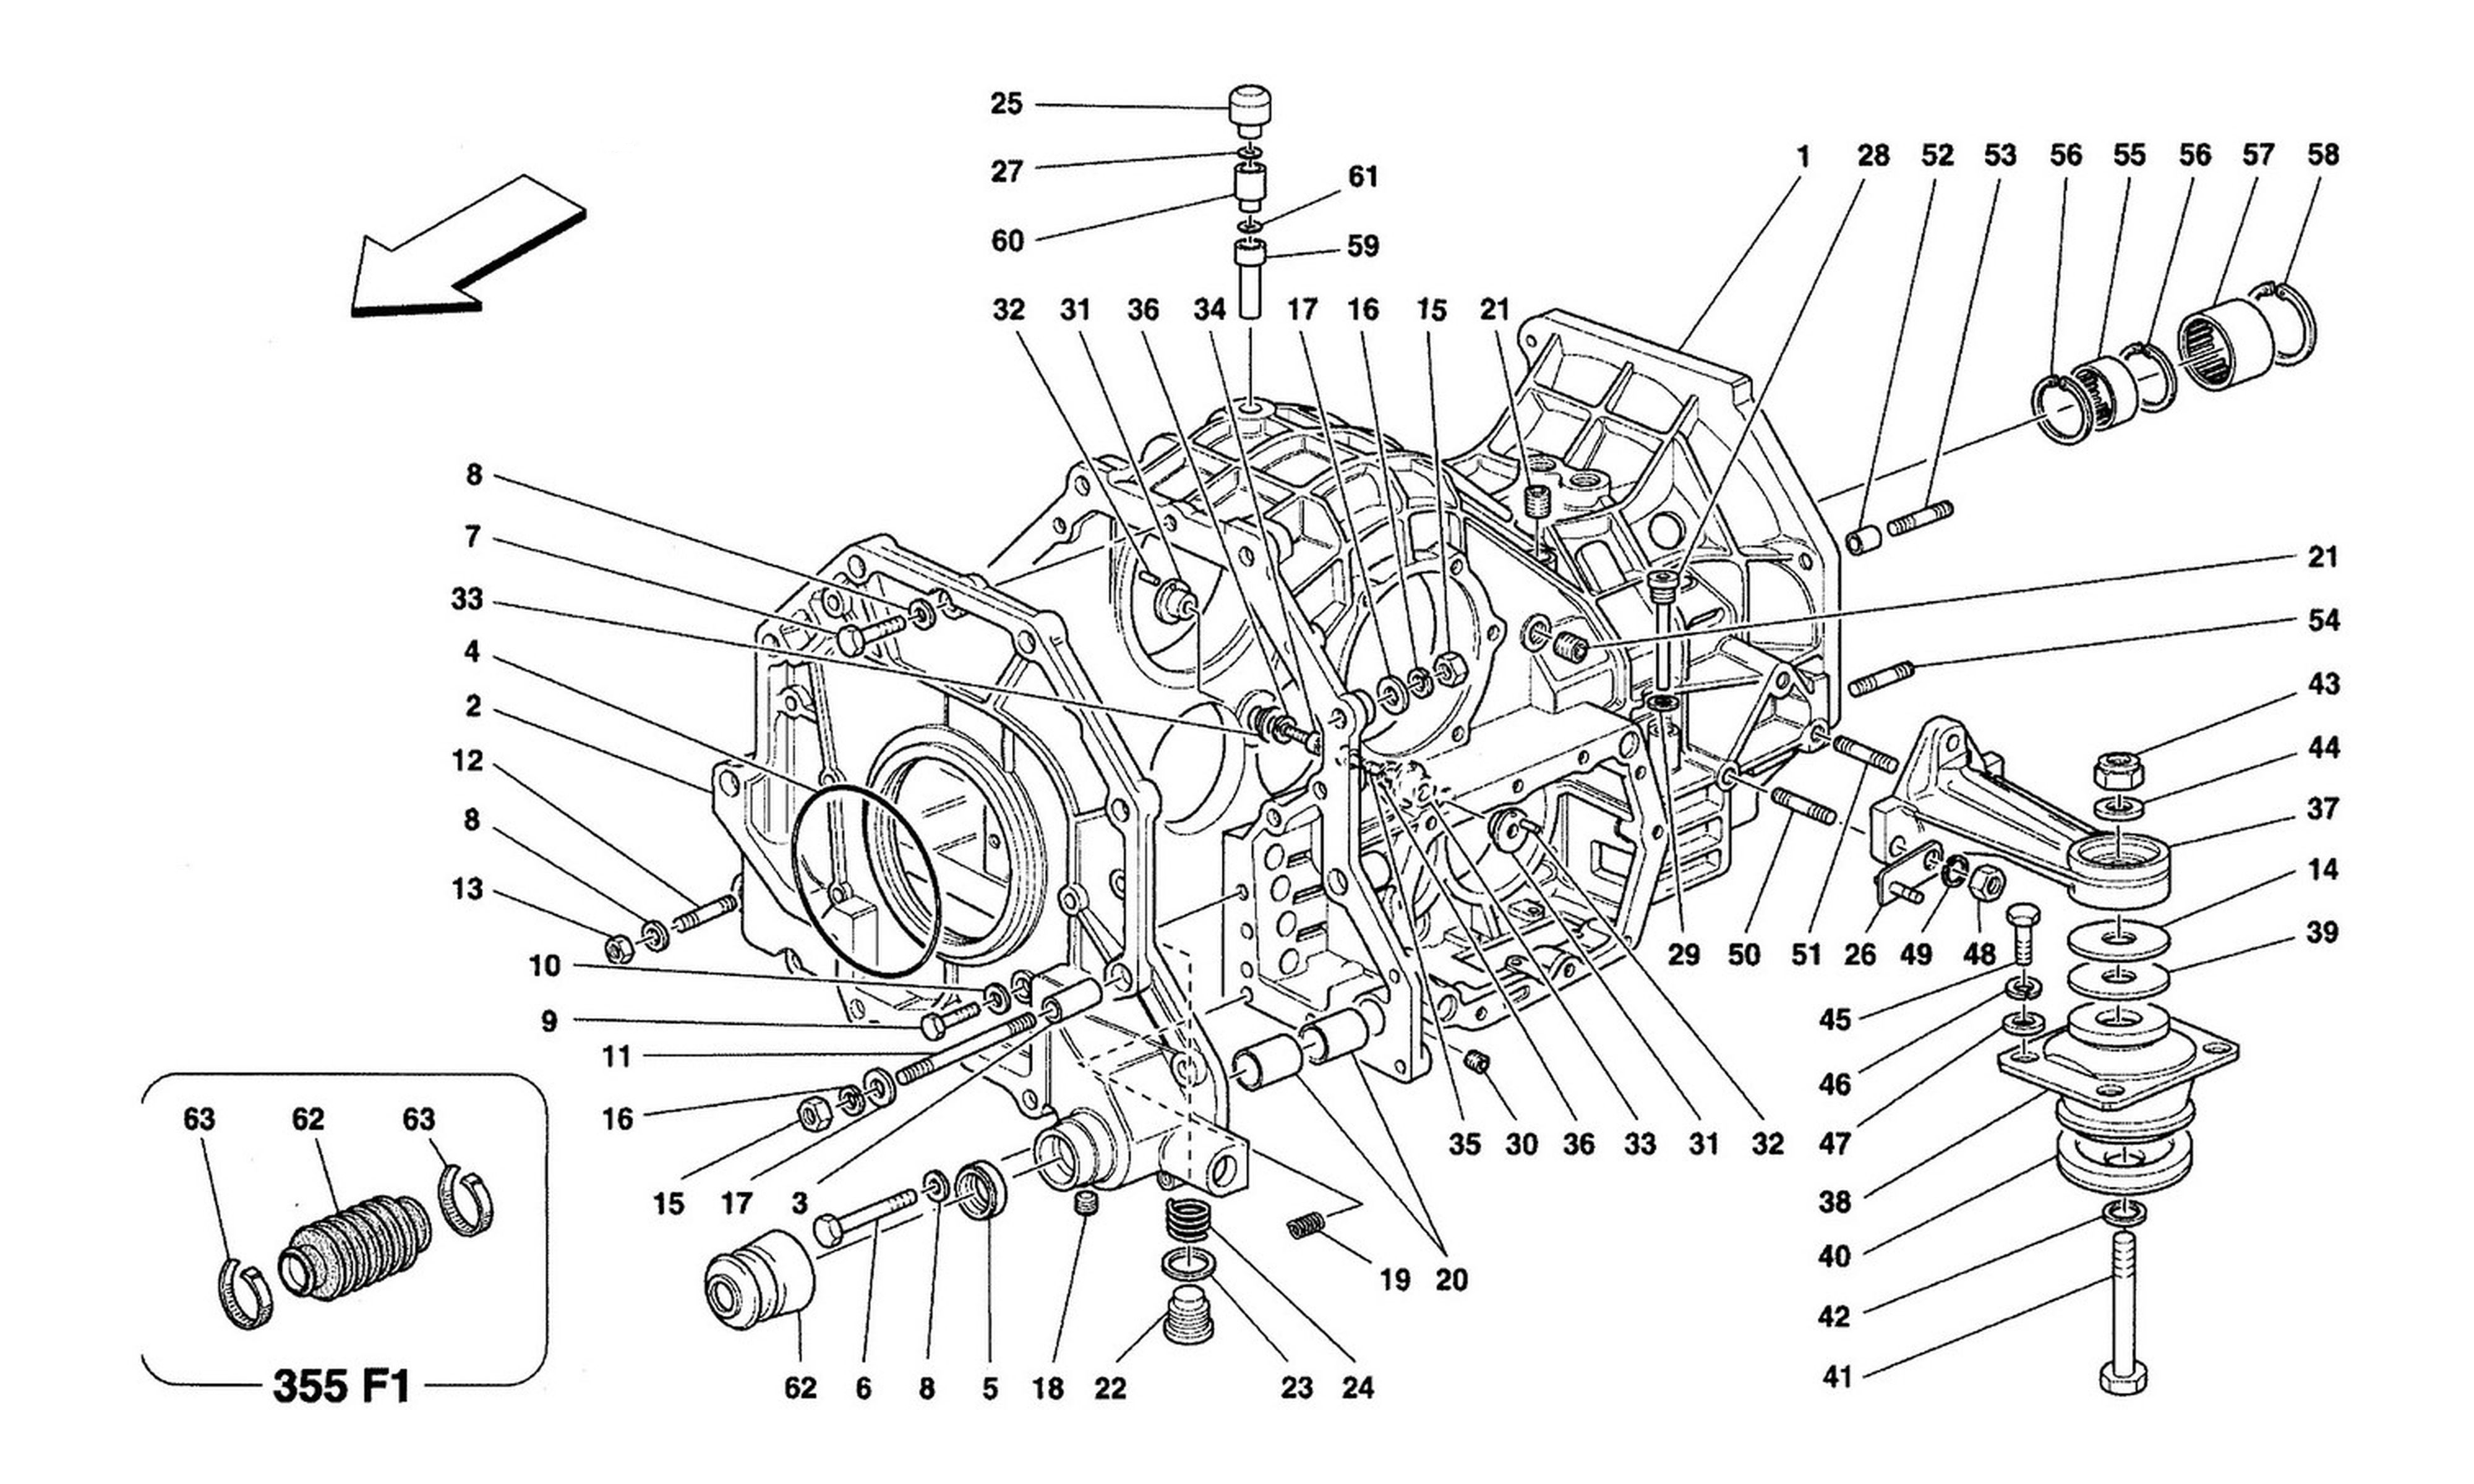 Schematic: Gearbox/Differential Housing And Intermediate Casing